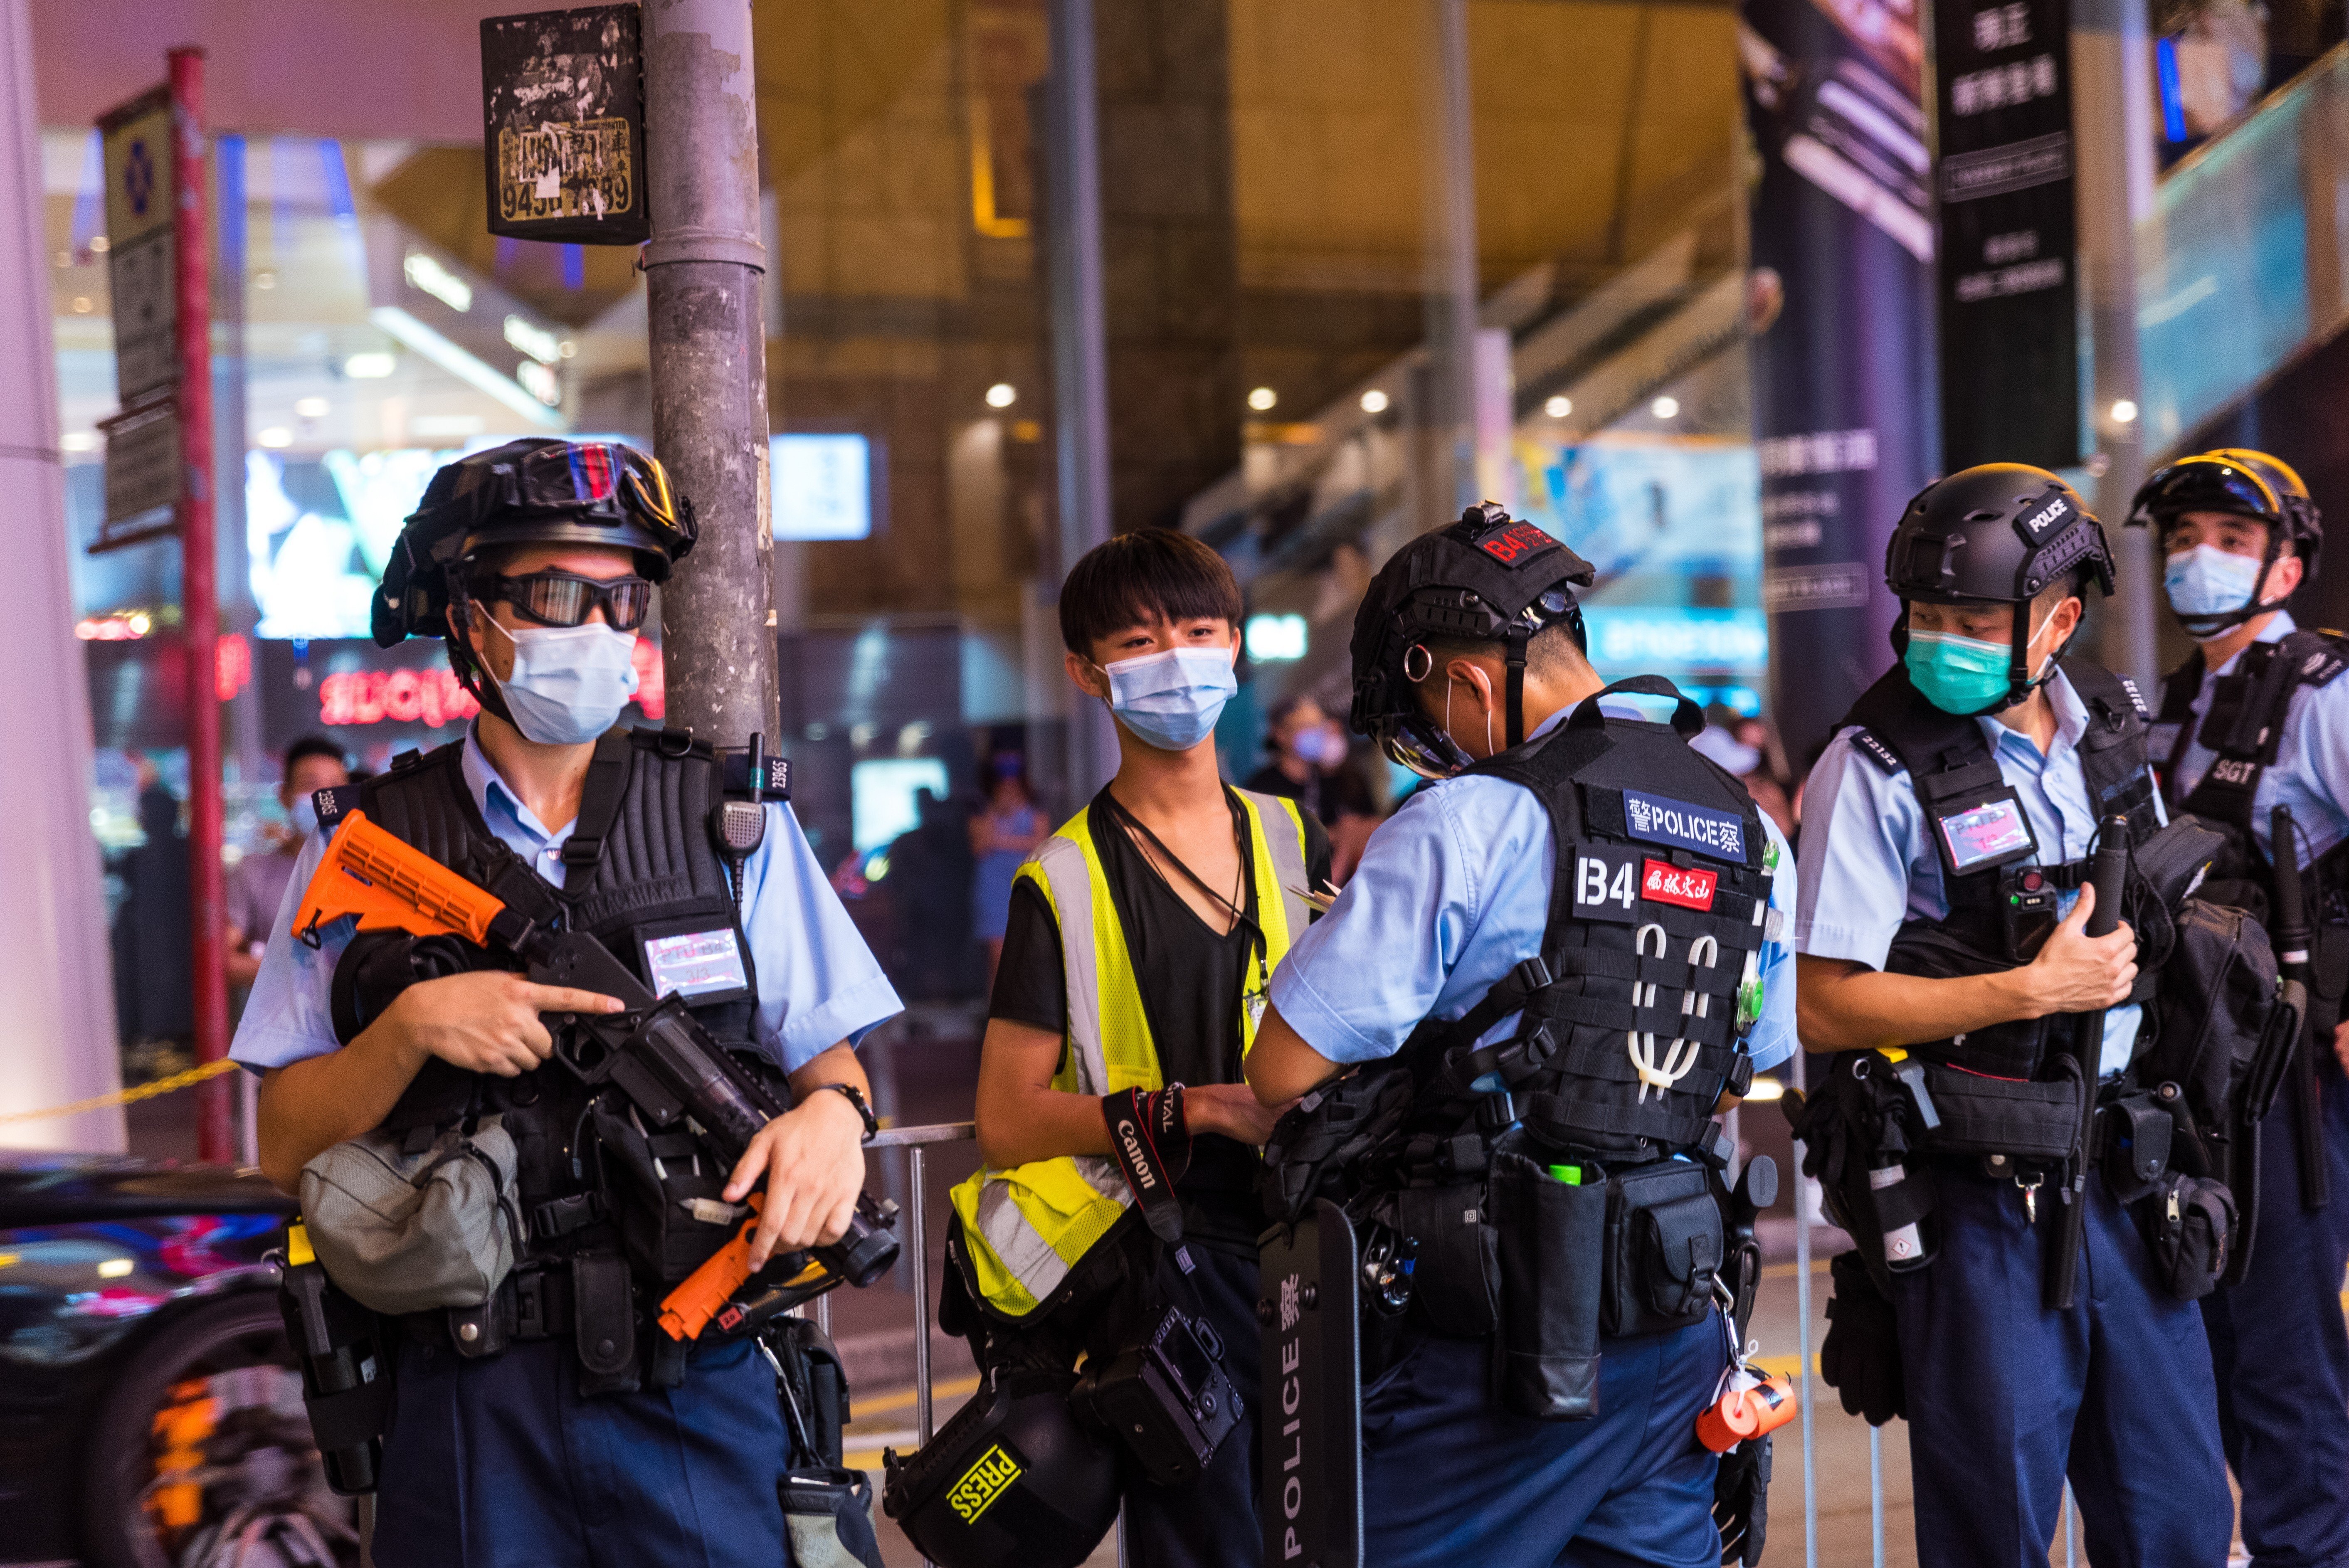 A police officer carries out a stop-and-search on a student journalist in Mong Kok on August 11, 2020. Photo: NurPhoto via Getty Images